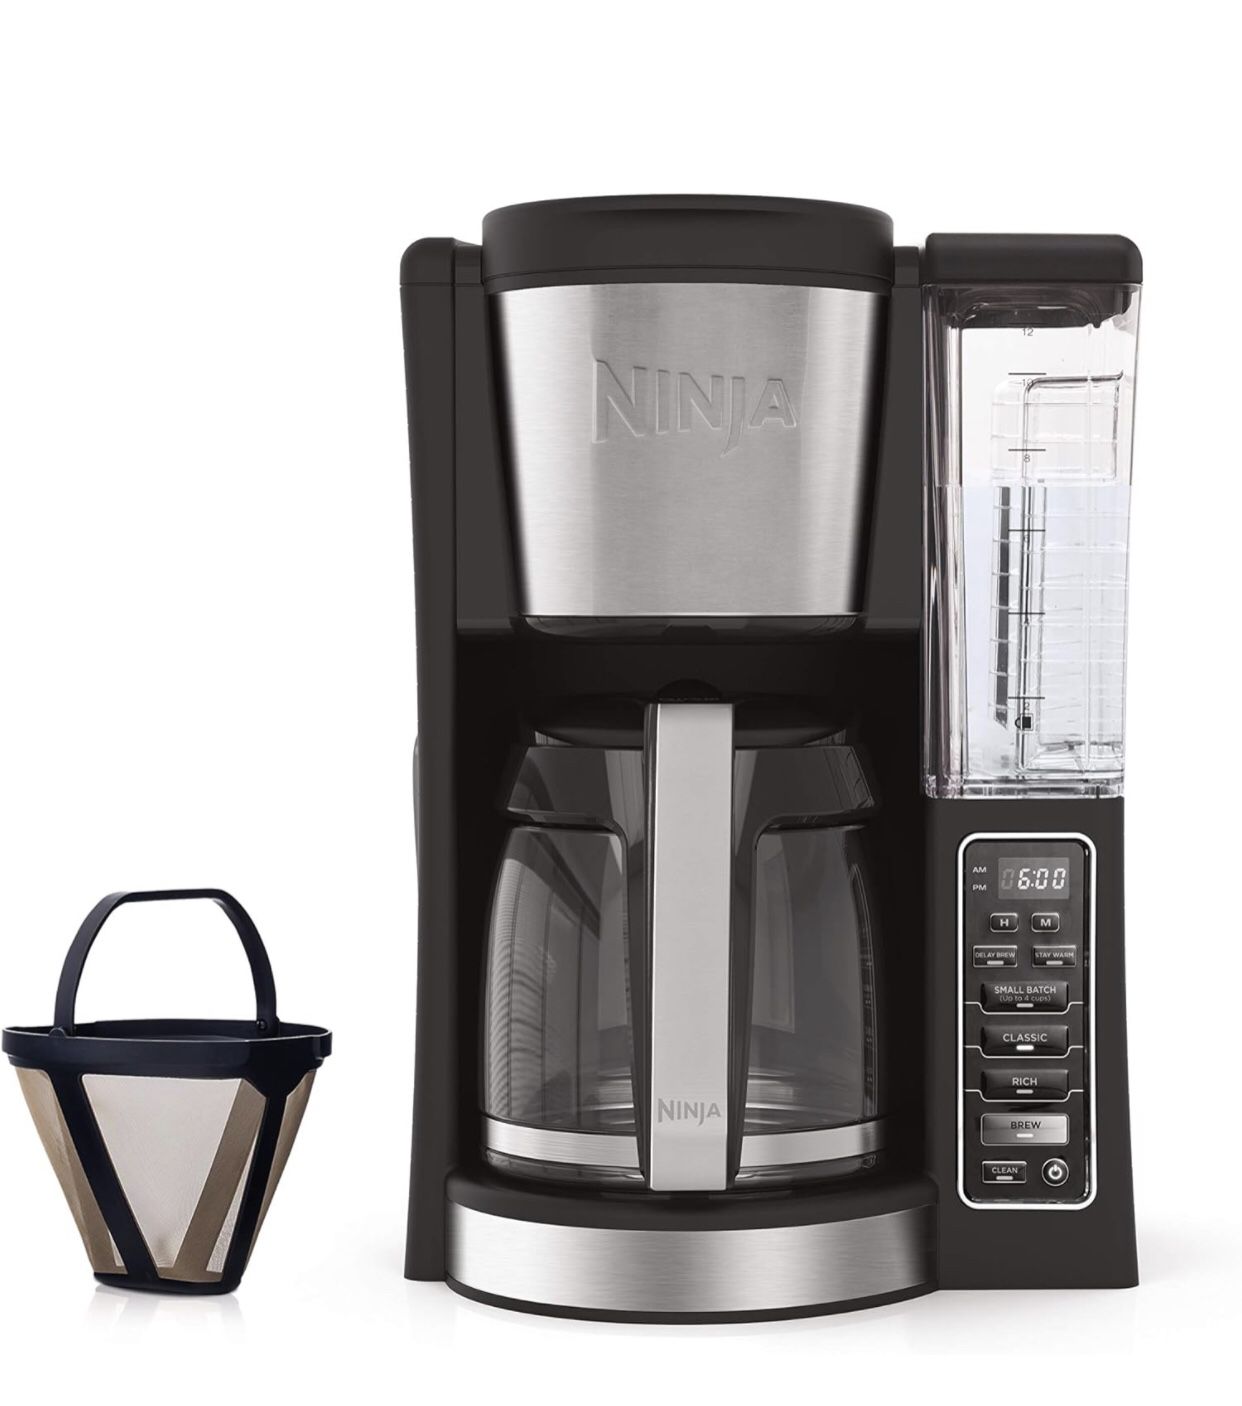 Ninja 12-Cup Programmable Coffee Maker with Classic and Rich Brews, 60 oz. Water Reservoir, and Thermal Flavor Extraction (CE201), Black/Stainless Ste